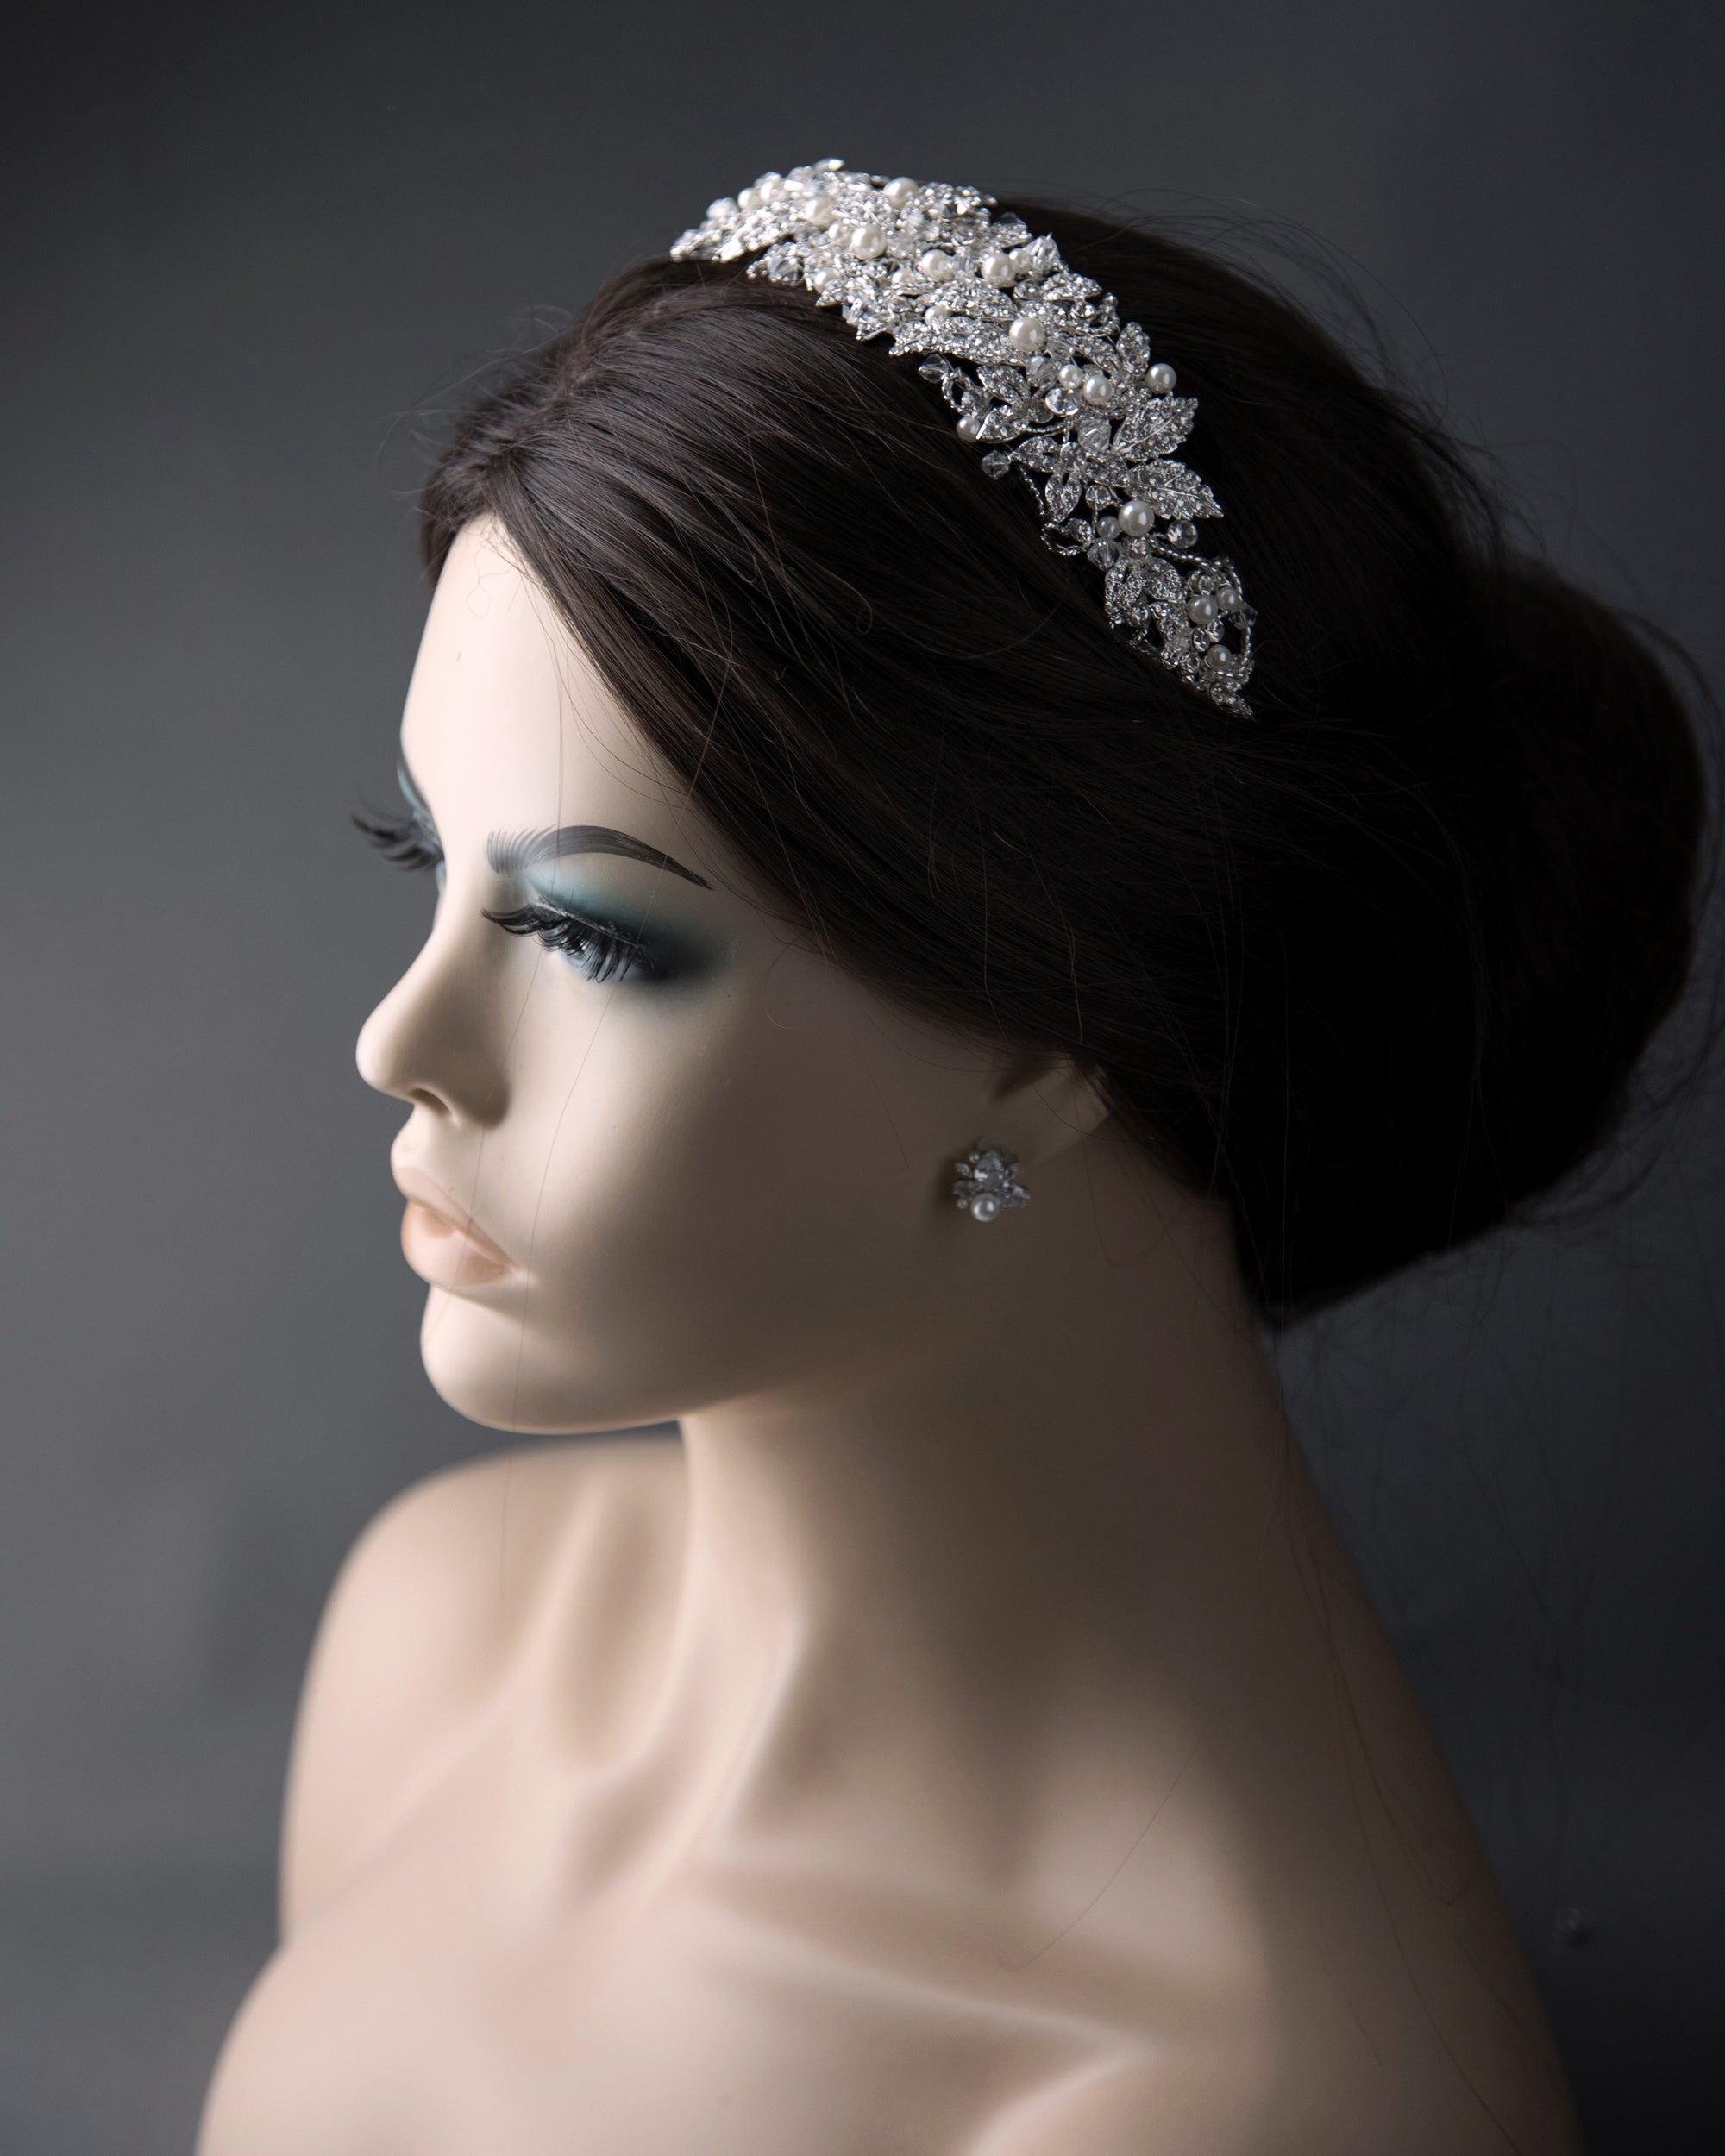 Luxurious Bridal Headpiece of Crystals and Pearls - Cassandra Lynne